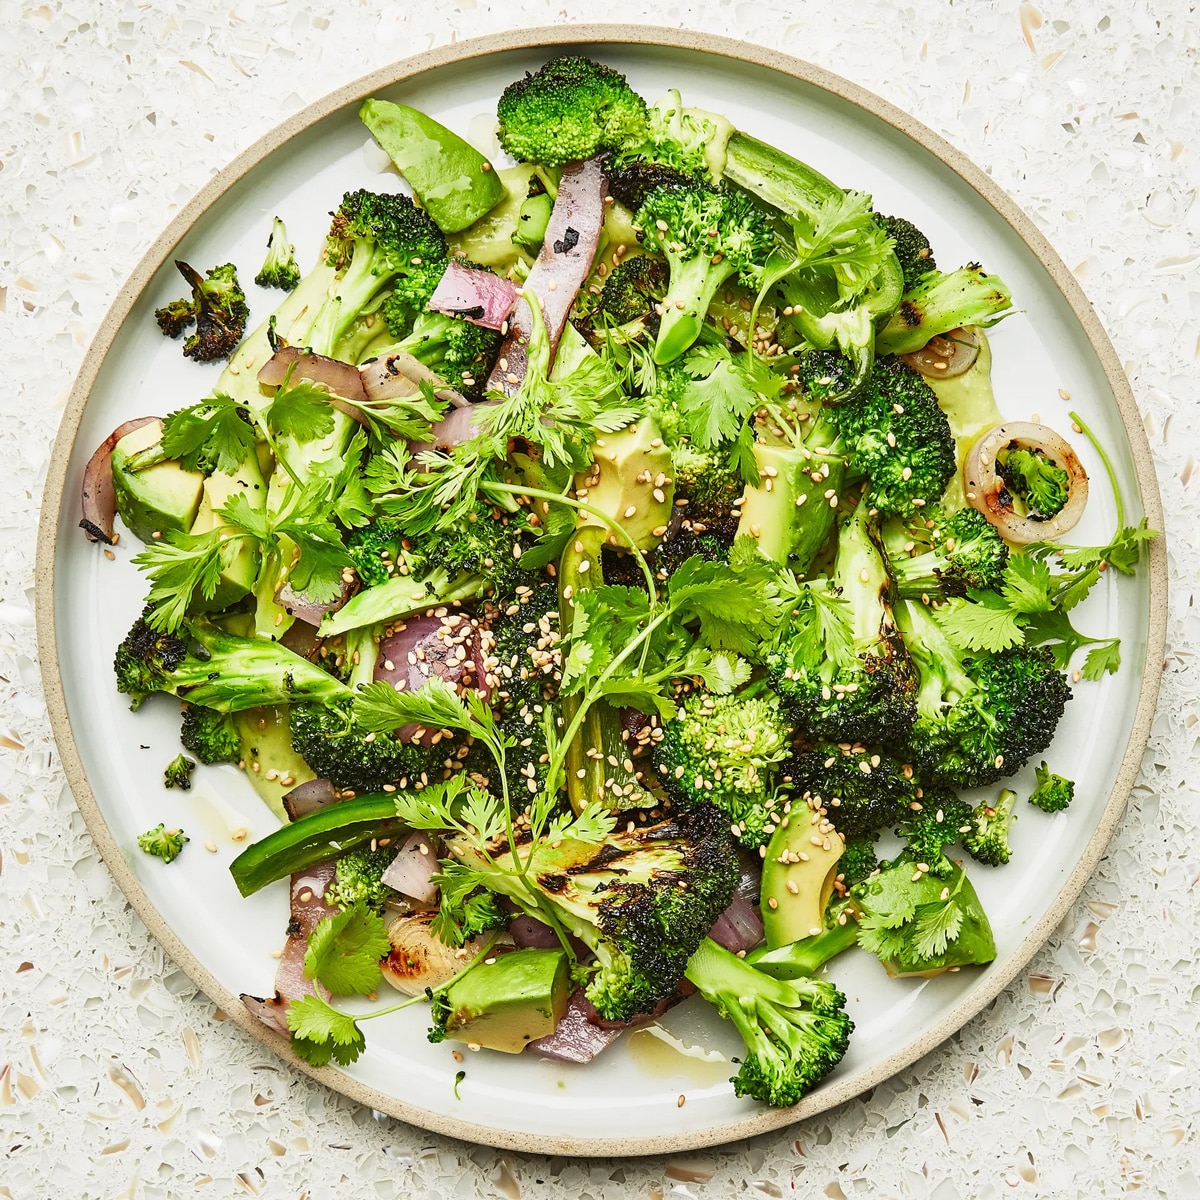 Grilled broccoli with avocado and sesame